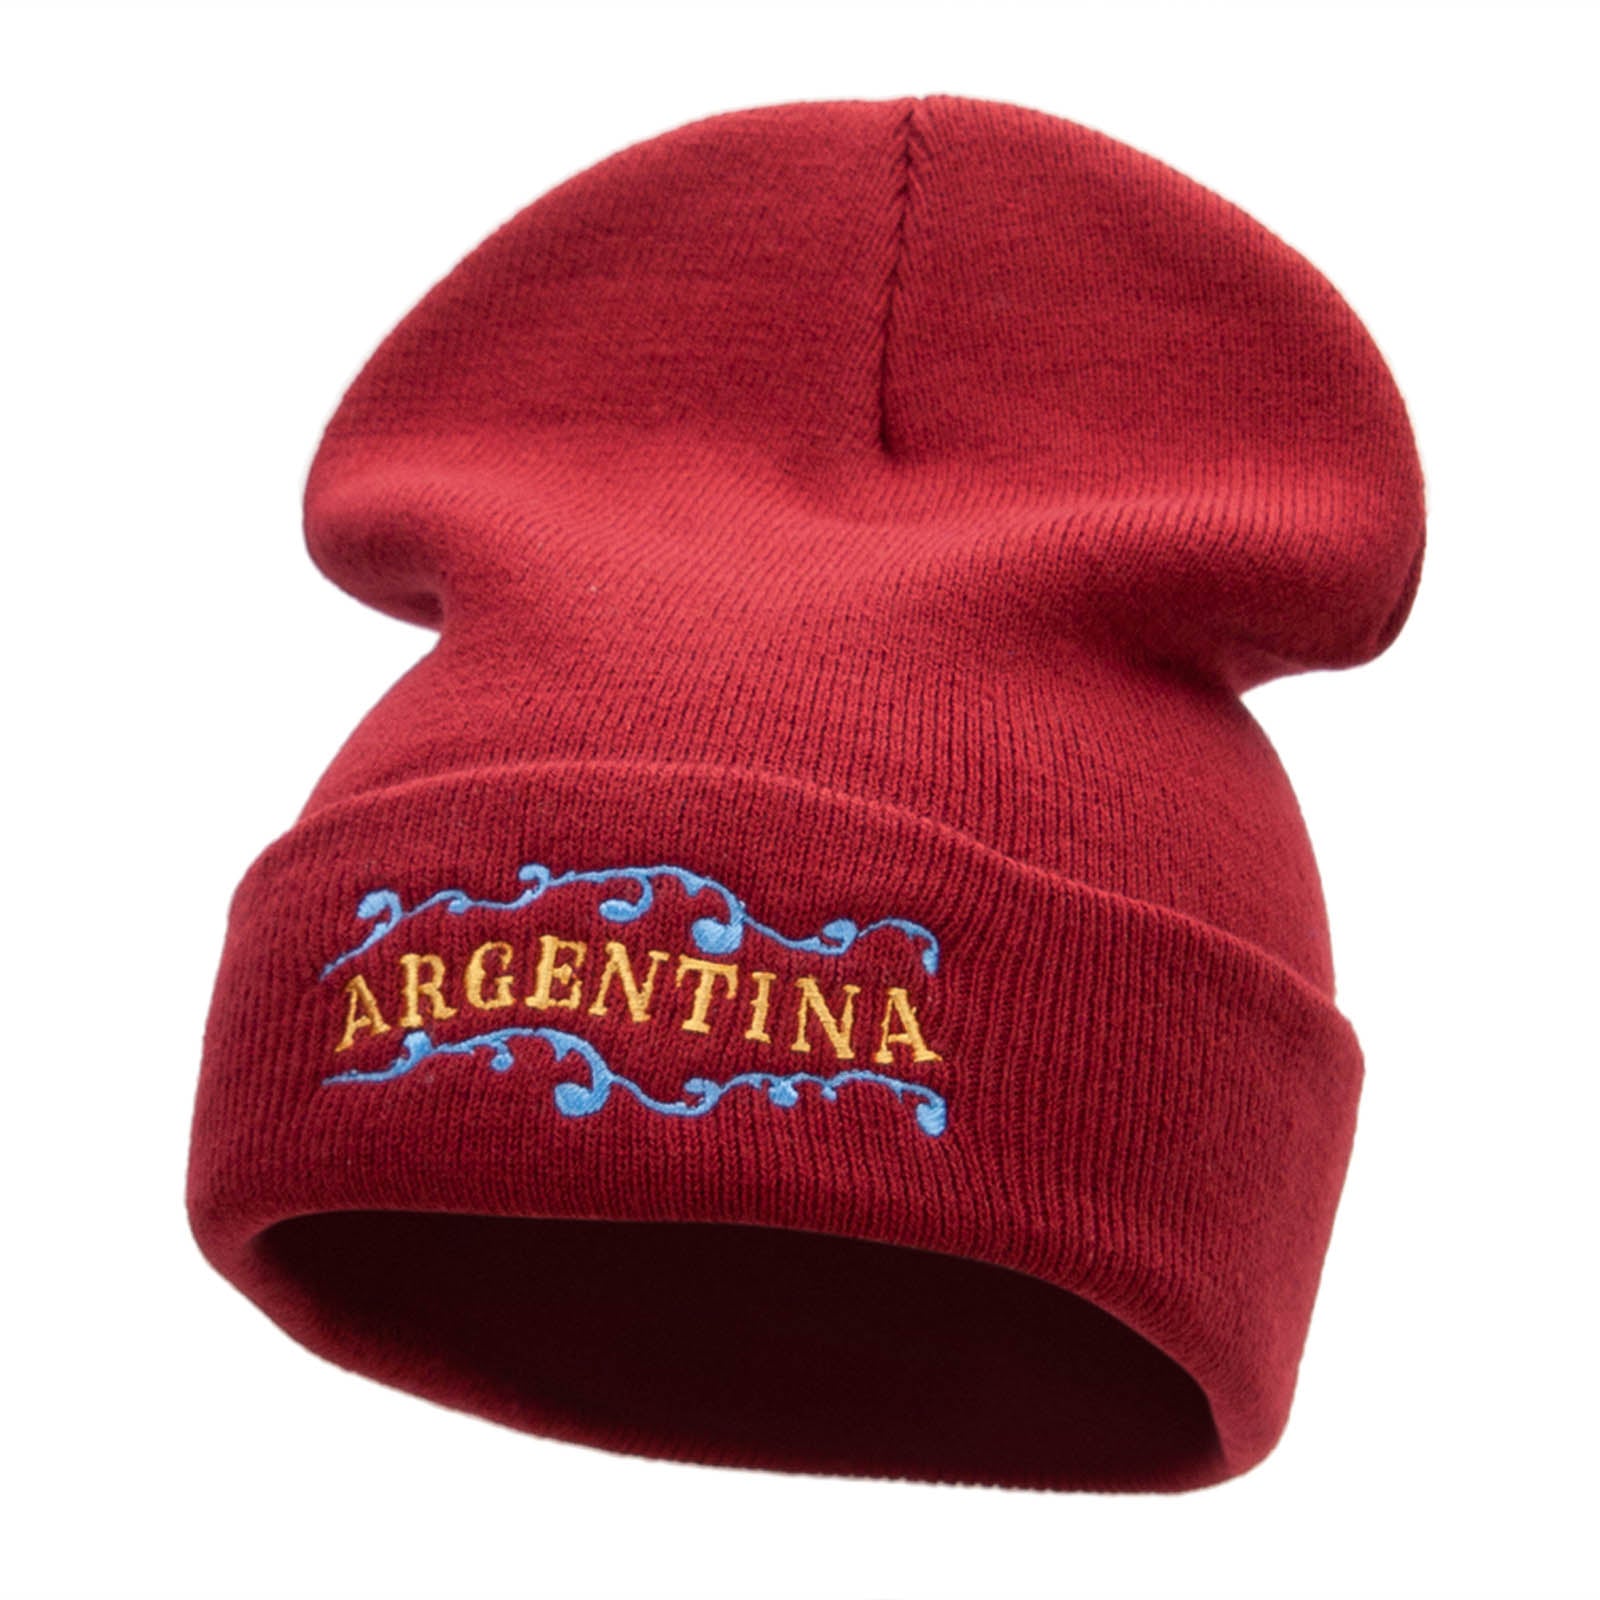 Argentina Embellishment Embroidered 12 Inch Long Knitted Beanie - Maroon OSFM